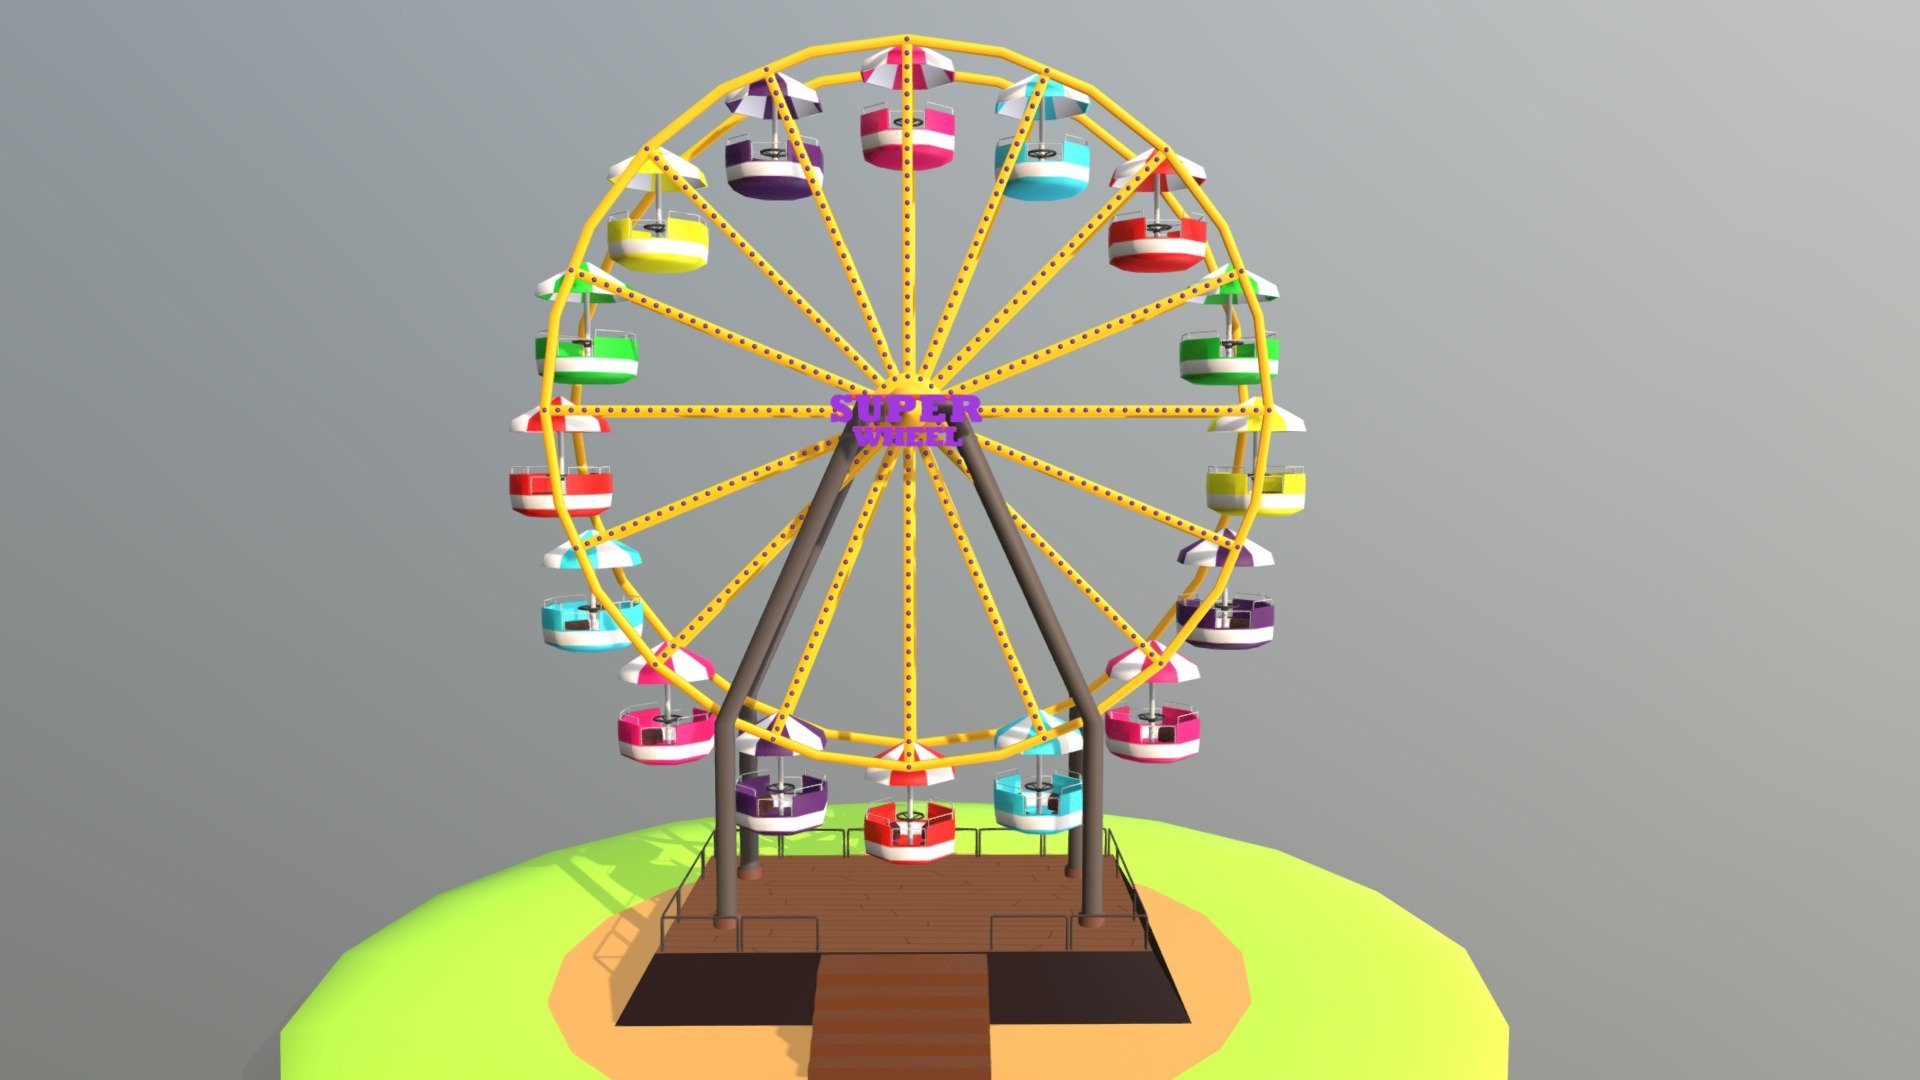 This Ferris wheel is medium/low quality 3D model. That will enhance detail to any of your rendering projects. . The model has a fully textured and detailed design that allows for close-up renders, and was originally modeled,texturized in Autodesk Maya 2018 and rendered with Arnold. The model have Uvs done and it contains all the textures. It very cute model it has colourful cabins(red,blue, yellow purple, green and pink).

This model can be used for any type of work as: low poly or high poly project, videogame, render, video, animation, film…This is perfect to use like a part of a amusement park scene or for a postcard image with other decoration such as the carousel that you could see in my profile too…

This contains a .mb maya file, .obj , .fbx. and .zip with all the textures.

I hope you like it, if you have any doubt or any question about it contact me without any problem! I will help you as soon as possible, if you like it I will aprecciate if you could give your personal review! Thanks - Ferris Wheel - Buy Royalty Free 3D model by Ainaritxu14 3d model